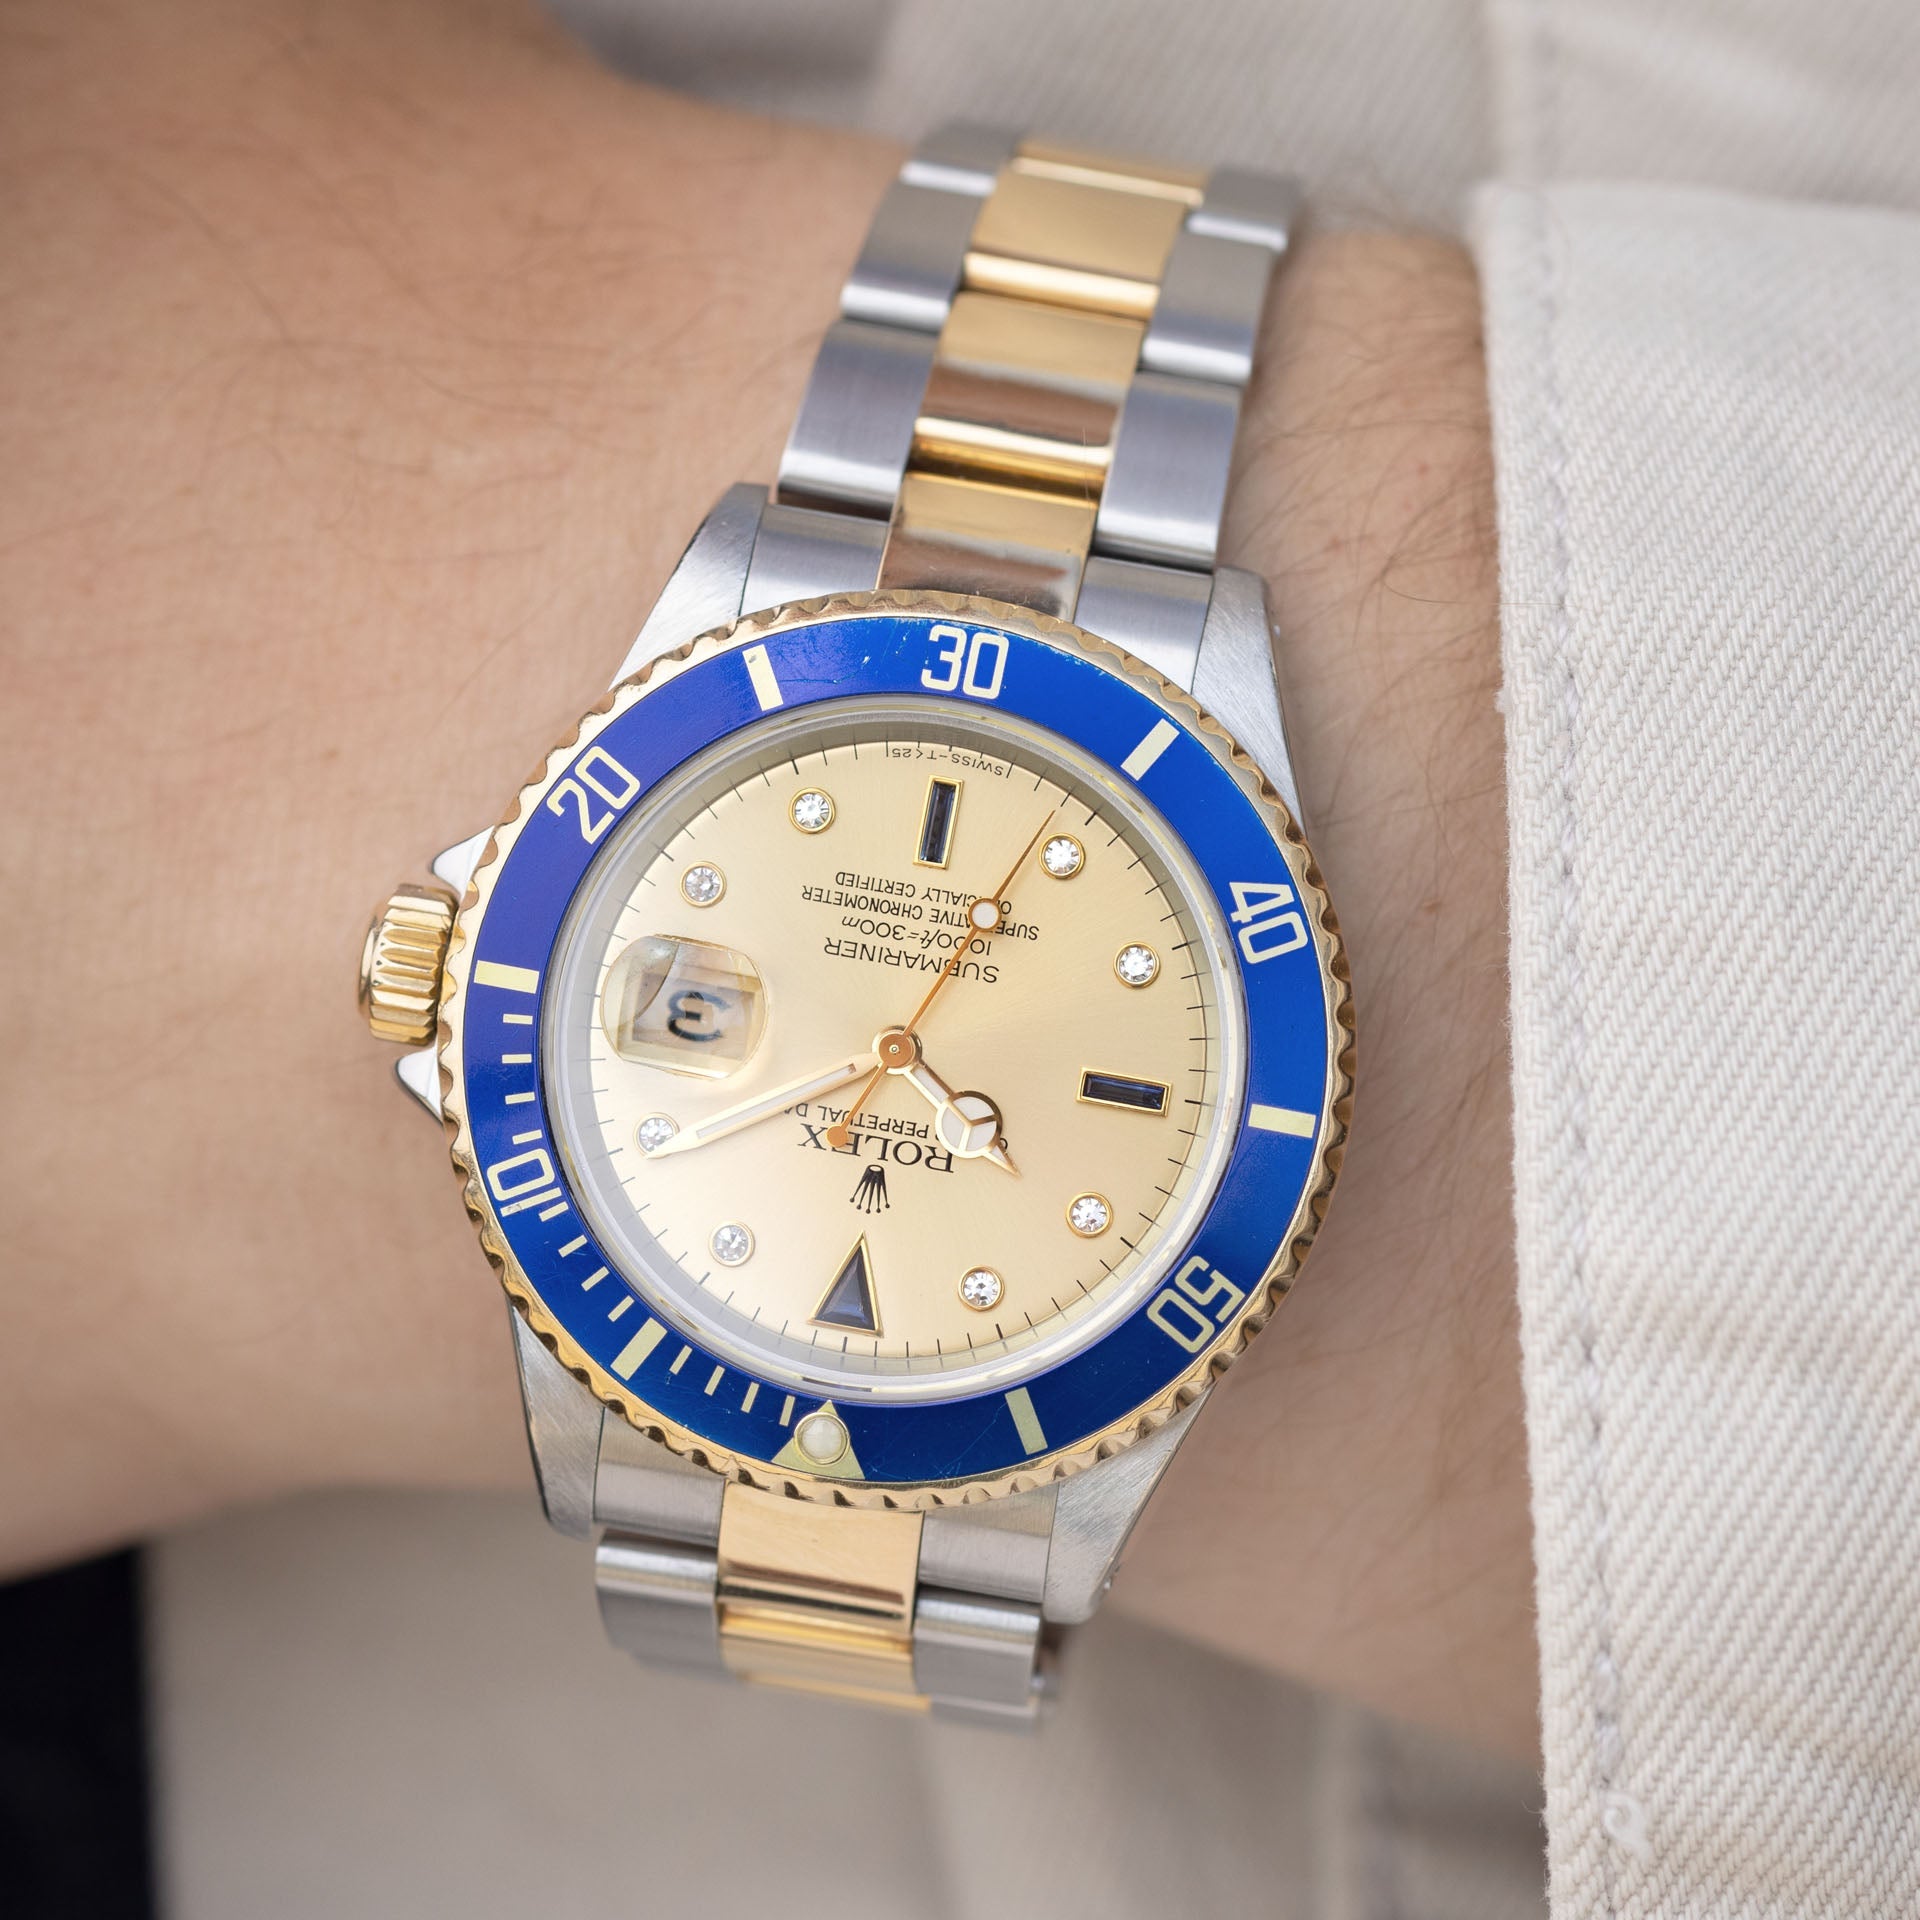 Rolex Submariner Two-Tone Blue Bezel and Dial